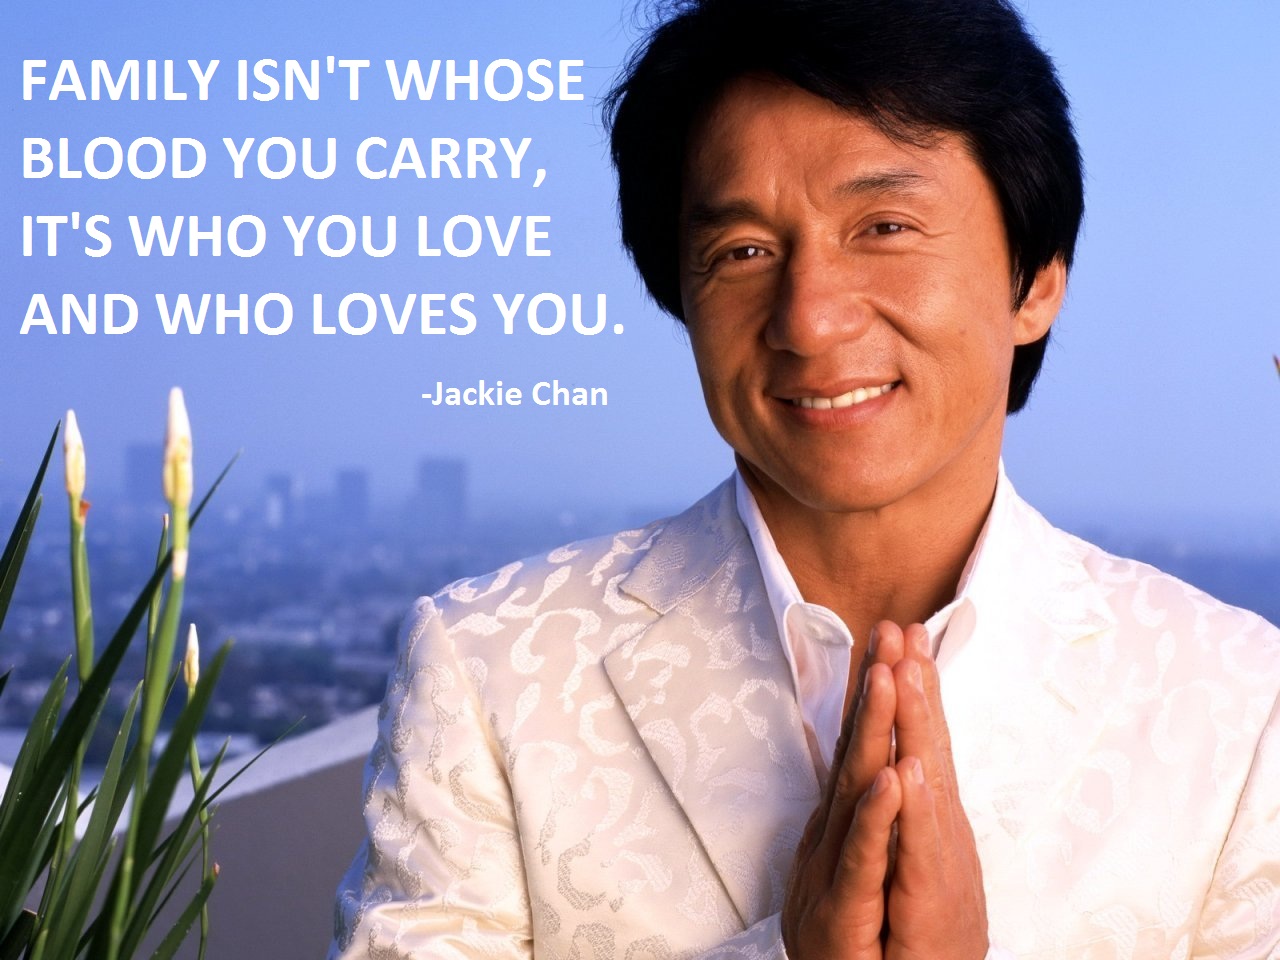 Jackie Chan quote #2